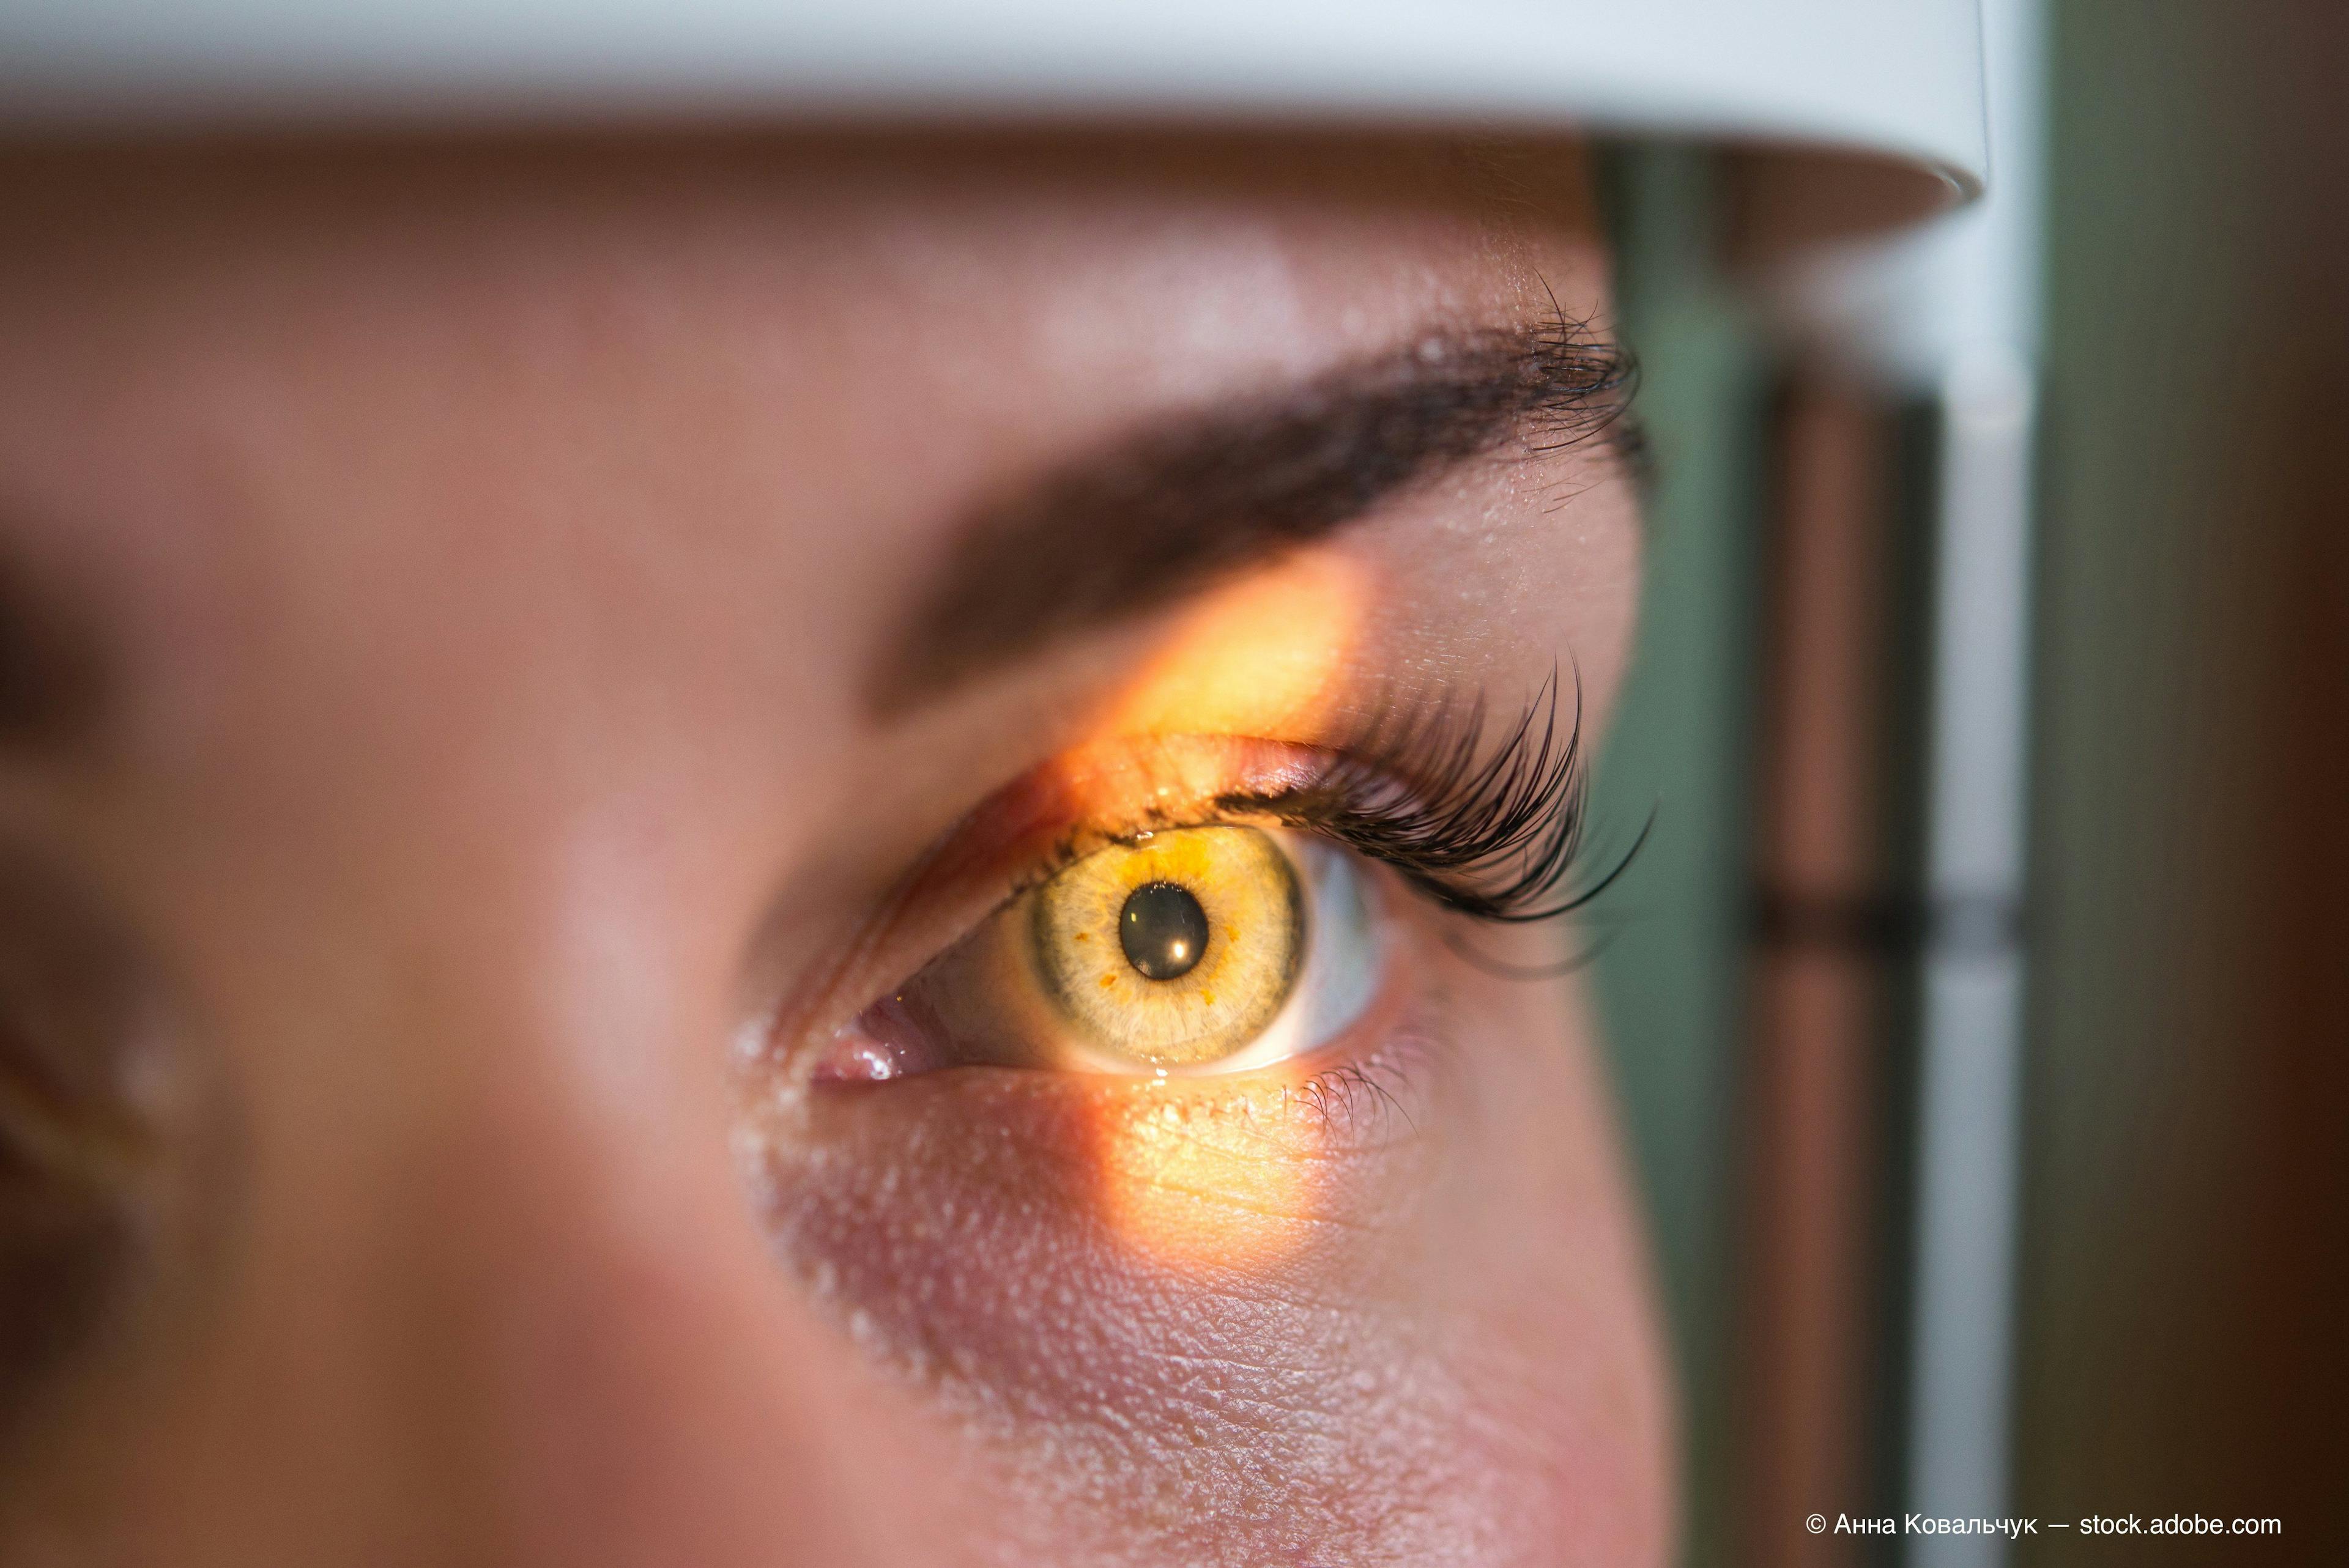 Eye-opener: Sticking to glaucoma therapy regimens vital